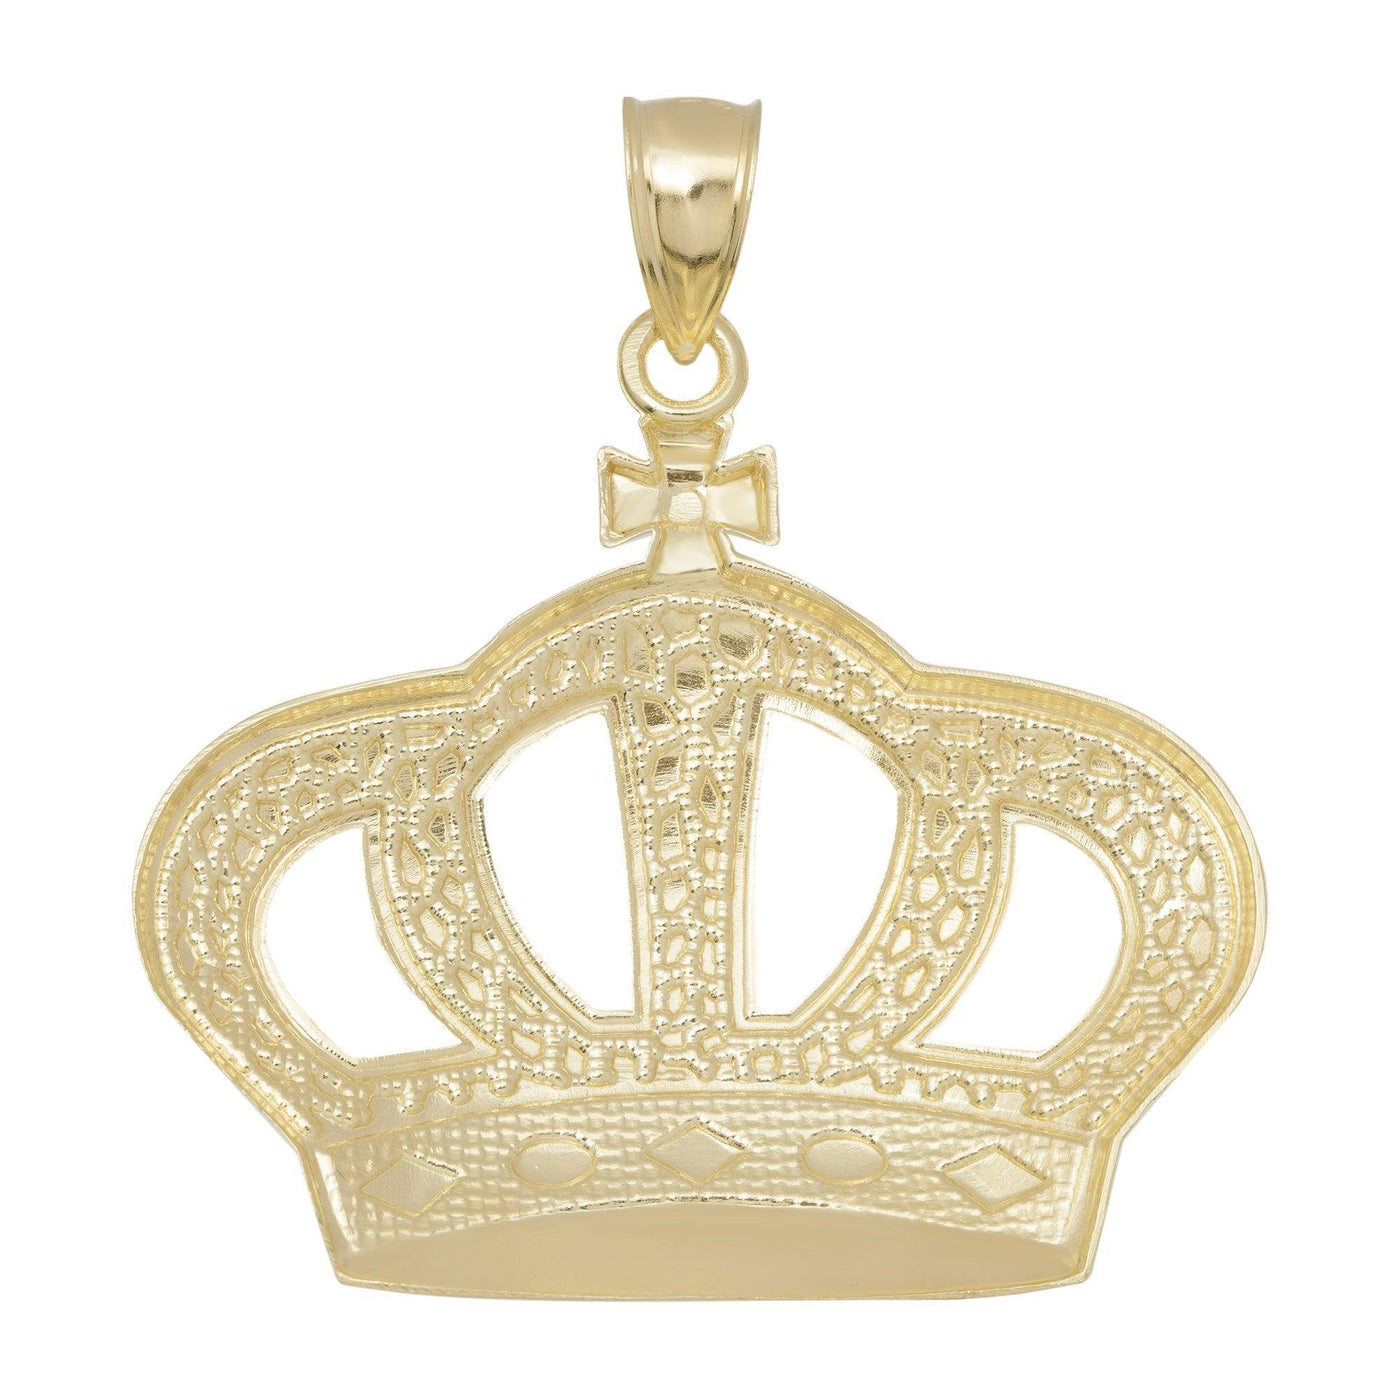 Textured Nugget Style Crown Pendant Solid 10K Yellow Gold - bayamjewelry